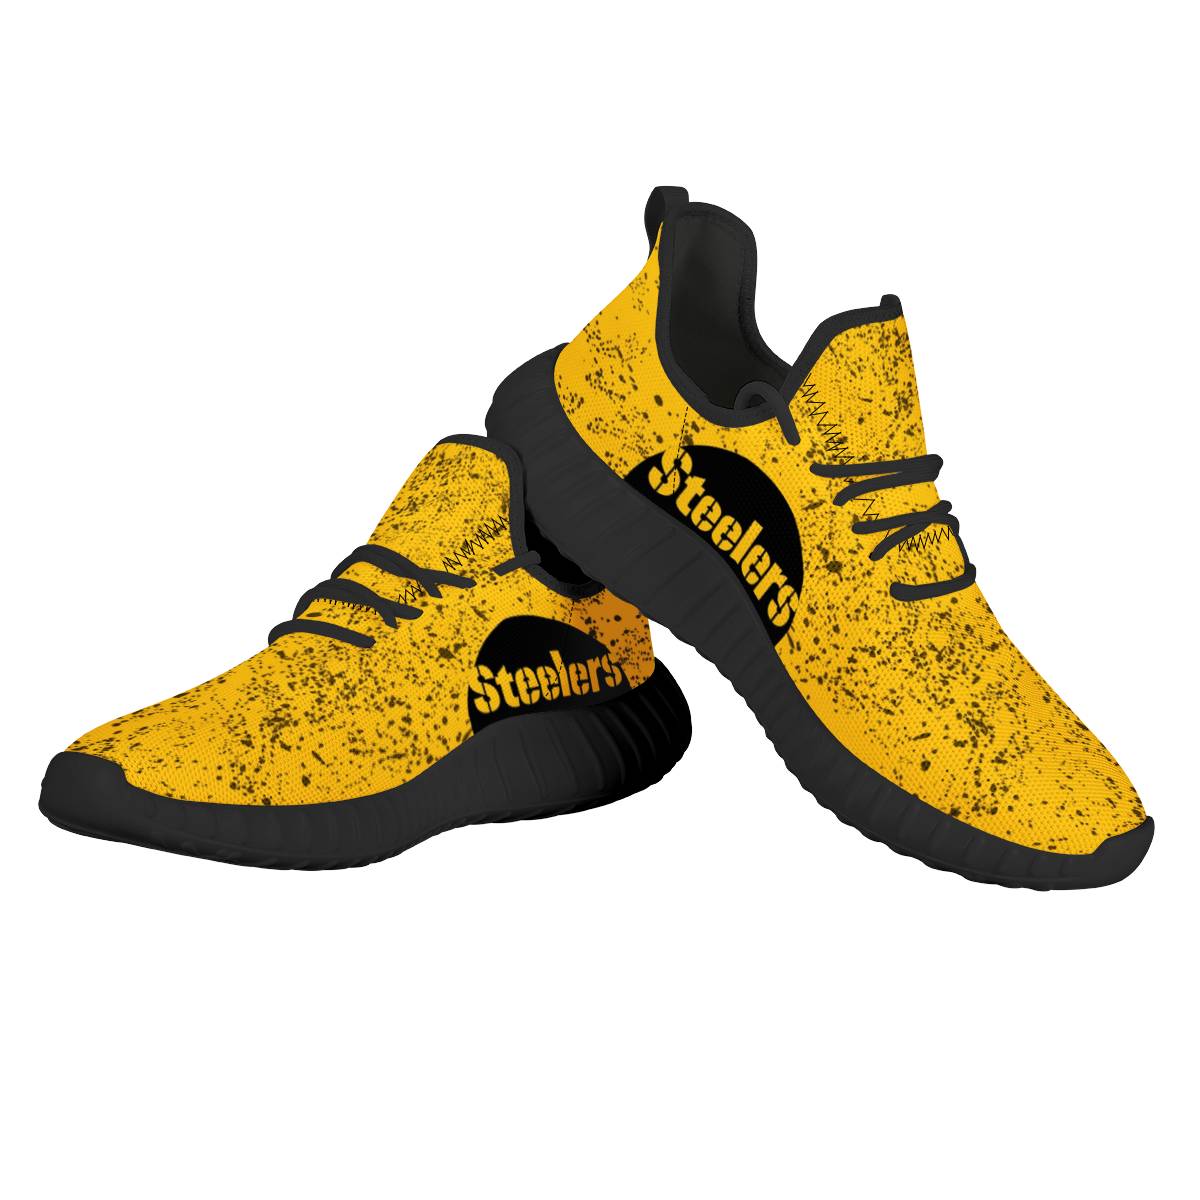 Men's Pittsburgh Steelers Mesh Knit Sneakers/Shoes 001